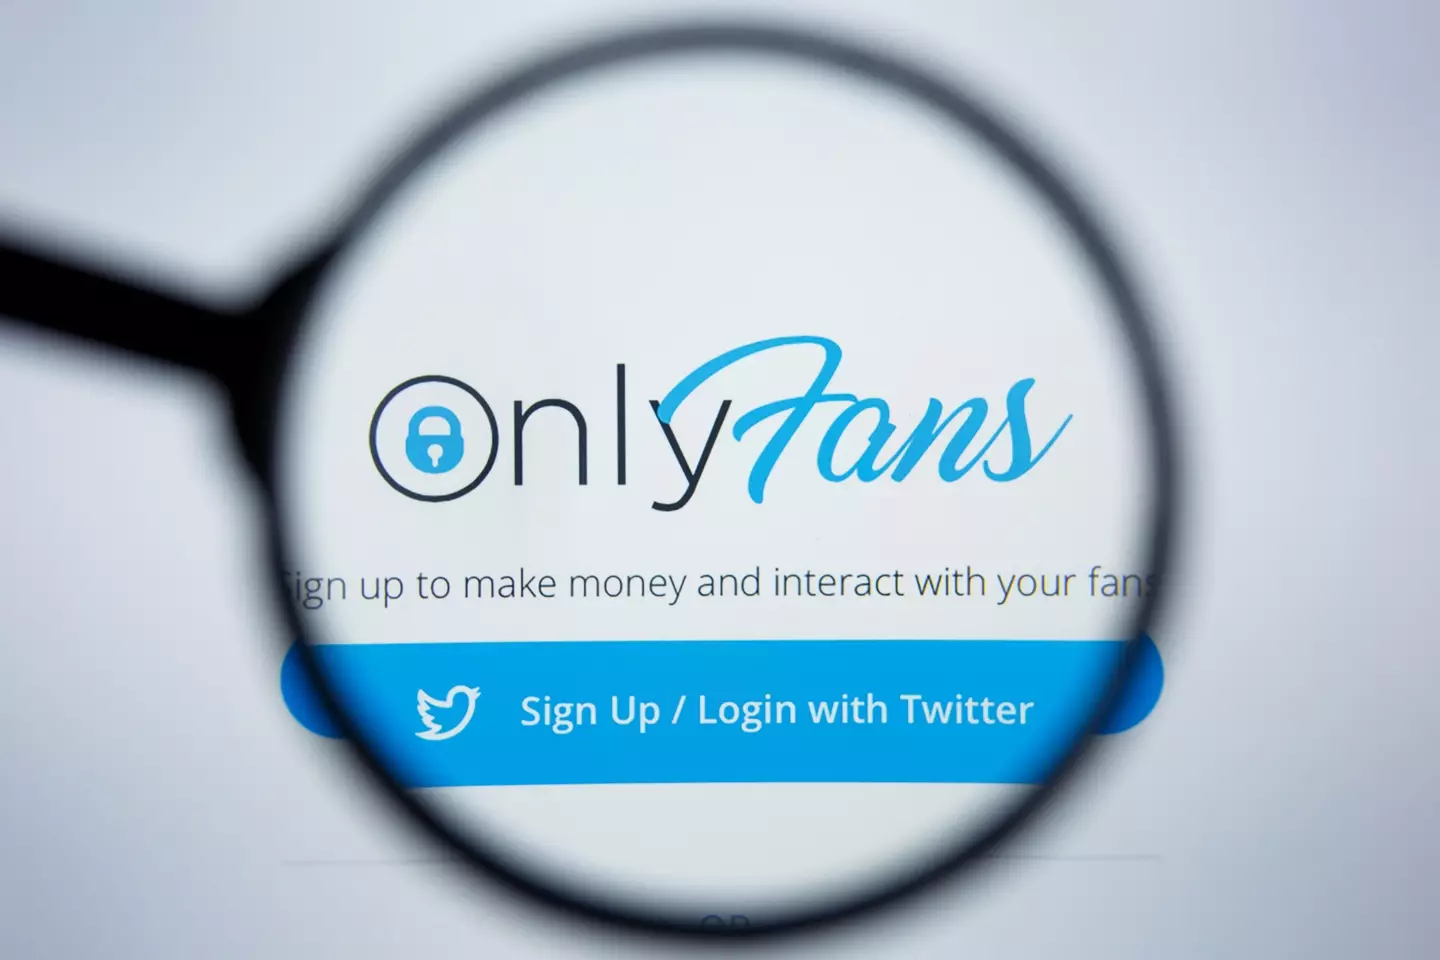 OnlyFans puts content behind a paywall, and is most commonly associated with adult entertainment.